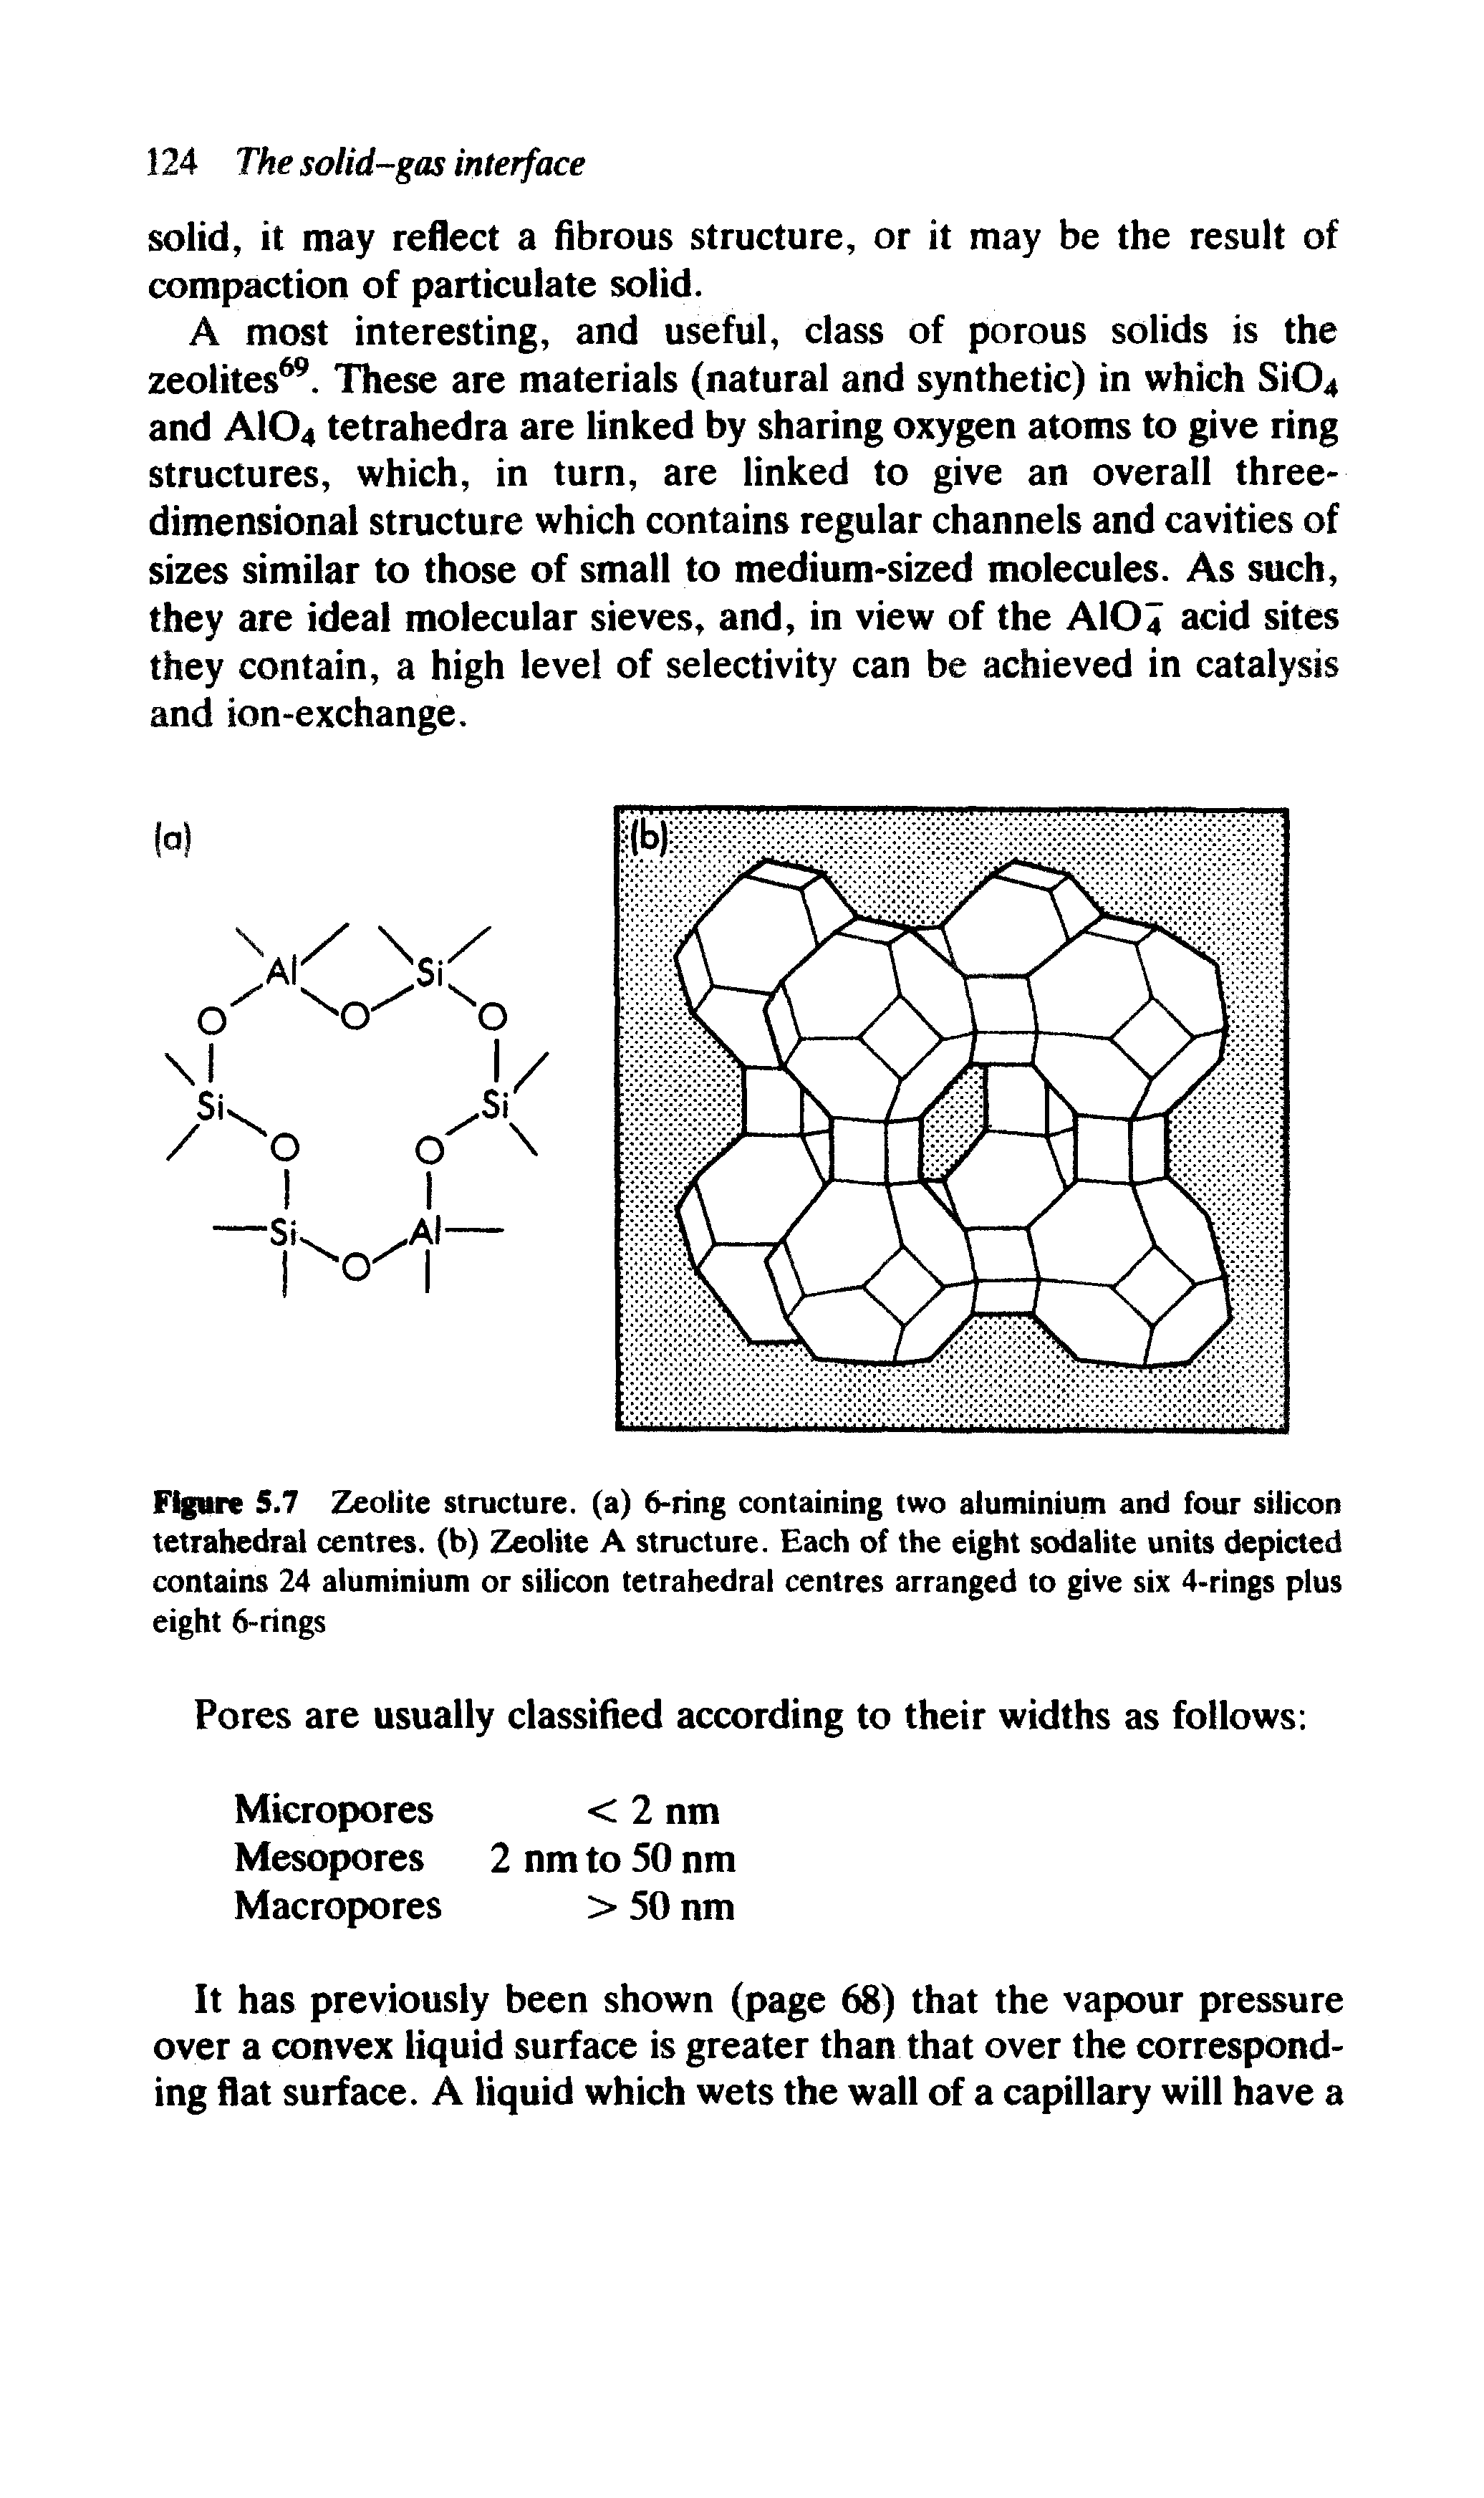 Figure 5.7 Zeolite structure, (a) 6-ring containing two aluminium and four silicon tetrahedral centres, (b) Zeolite A structure. Each of the eight sodalite units depicted contains 24 aluminium or silicon tetrahedral centres arranged to give six 4-rings plus eight 6-rings...